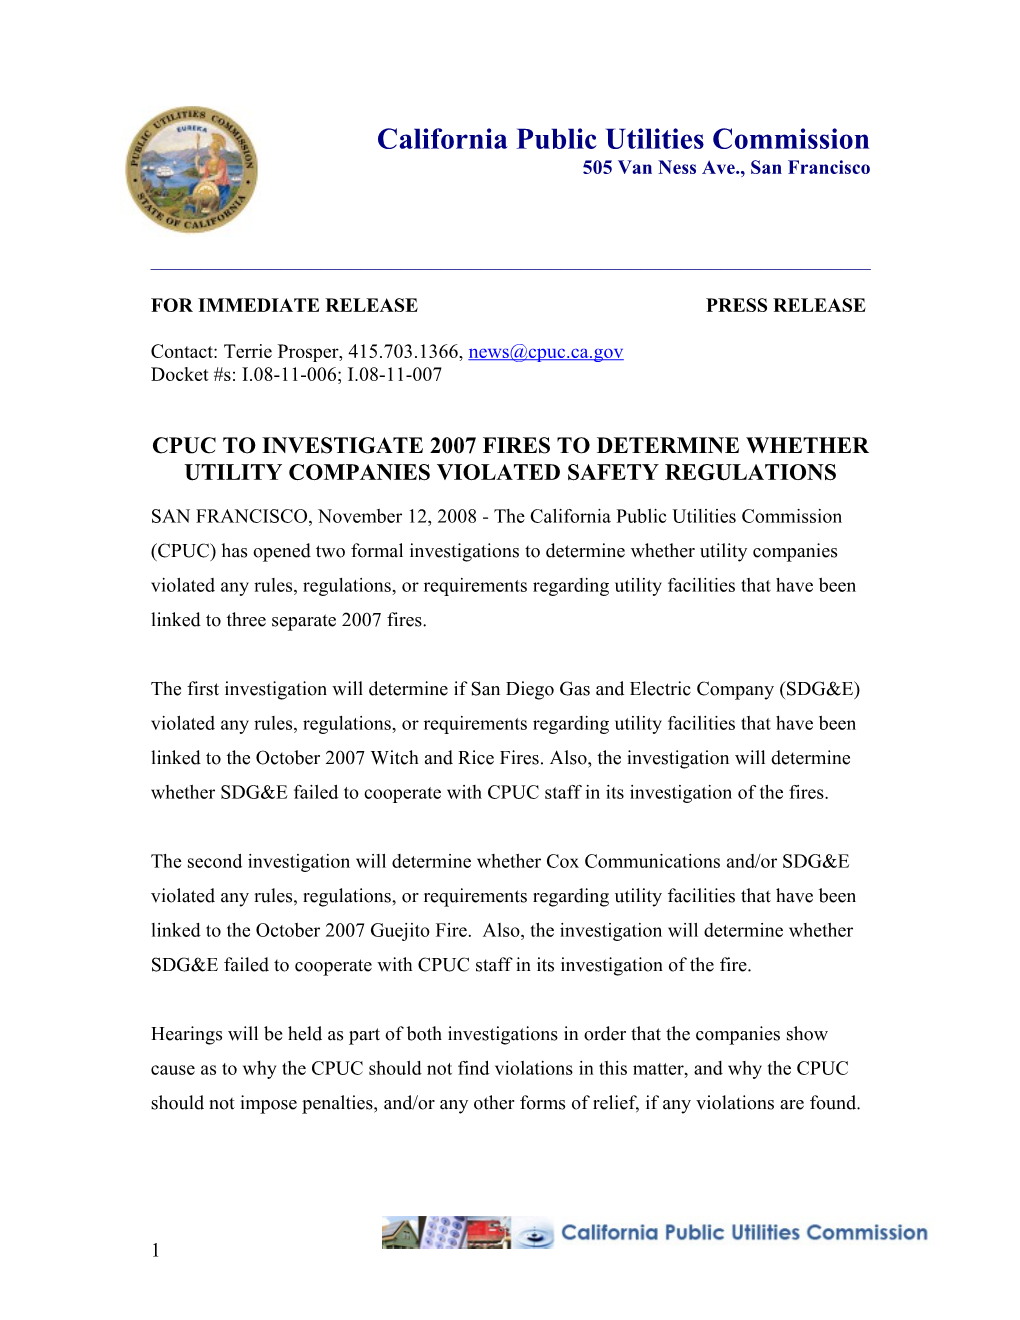 Cpuc to Investigate 2007 Fires to Determine Whether Utility Companies Violated Safety